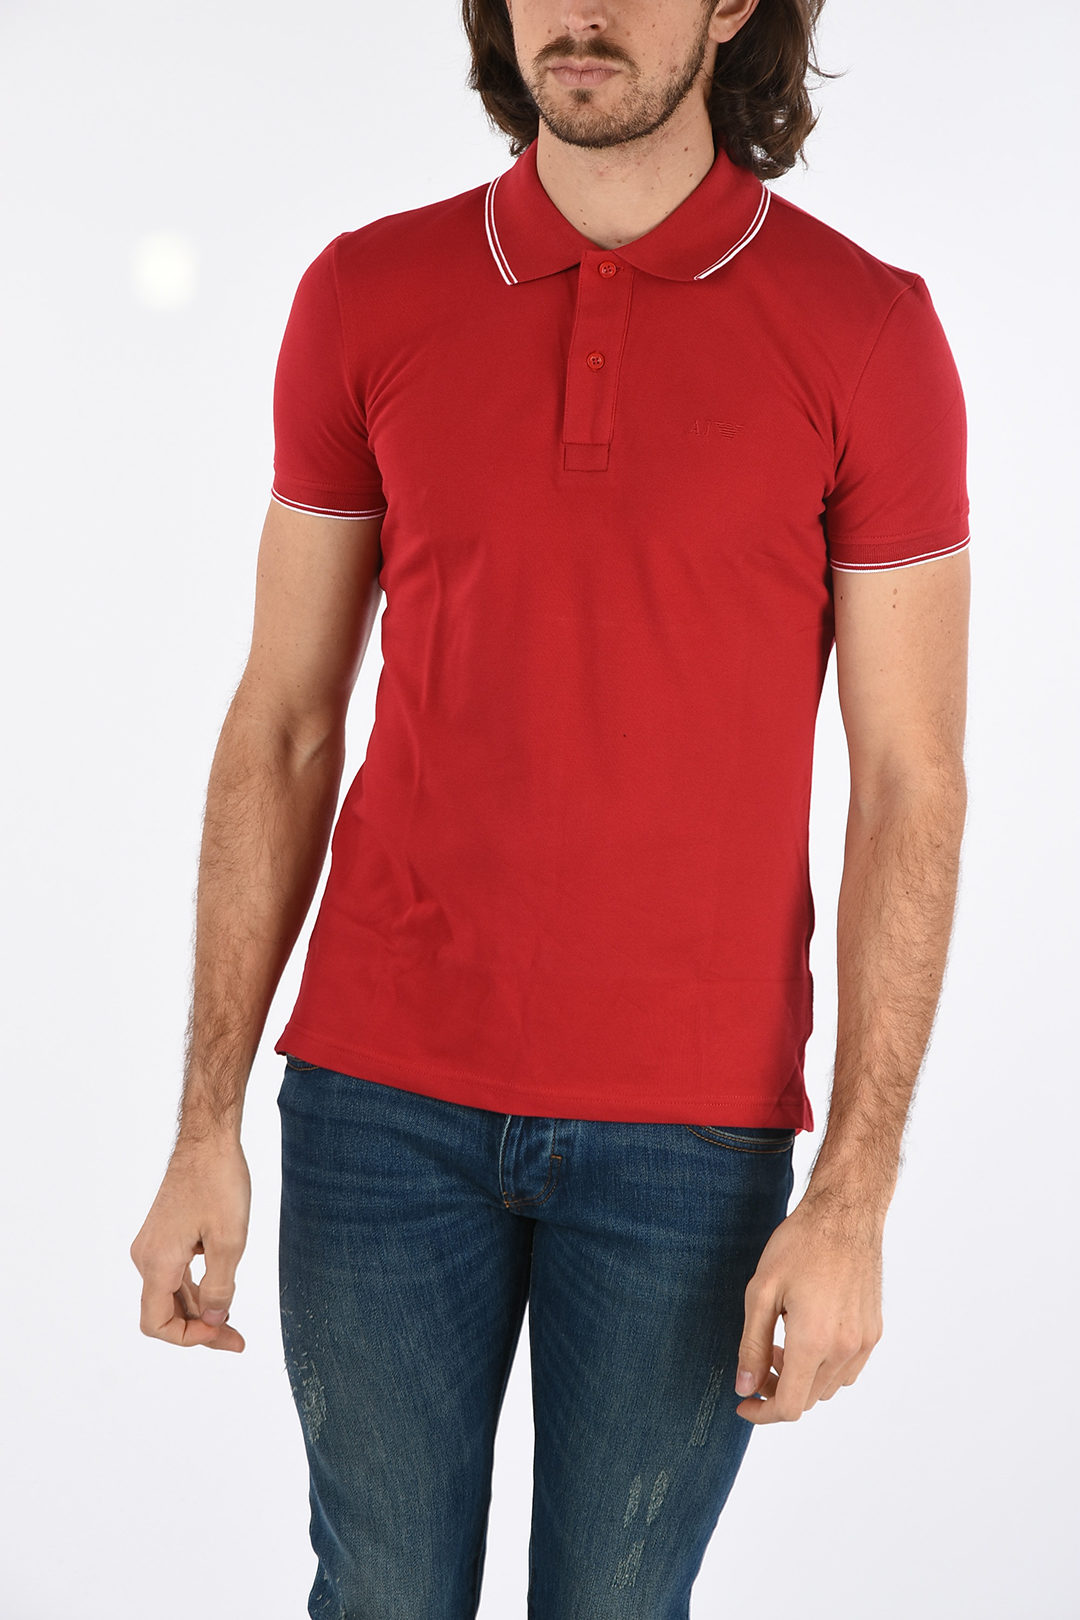 Armani ARMANI JEANS Extra Slim Fit Pique Polo men - Glamood Outlet